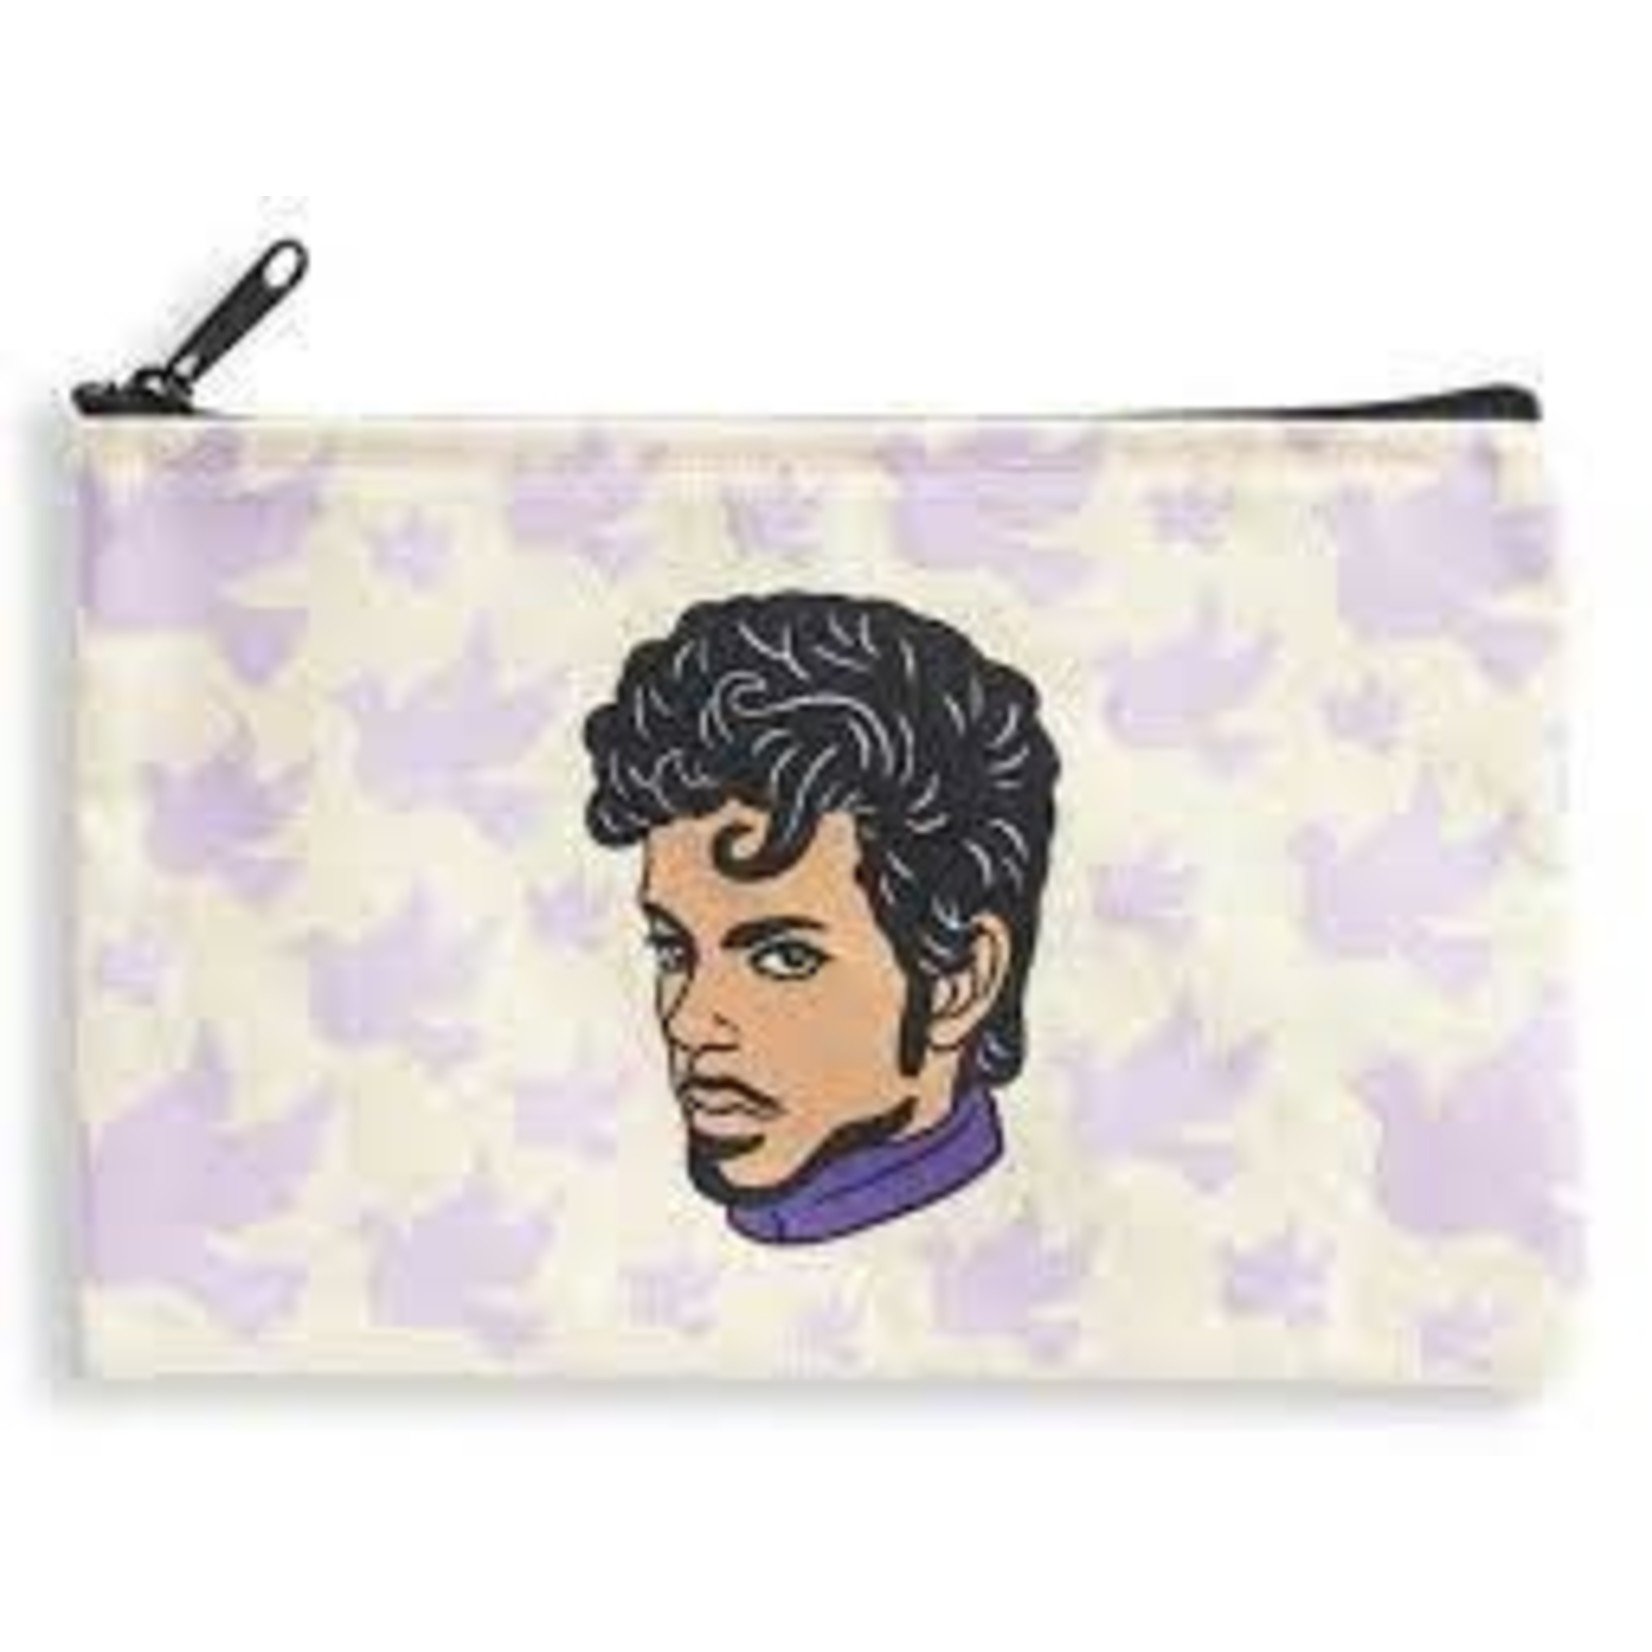 The Found Prince Pouch